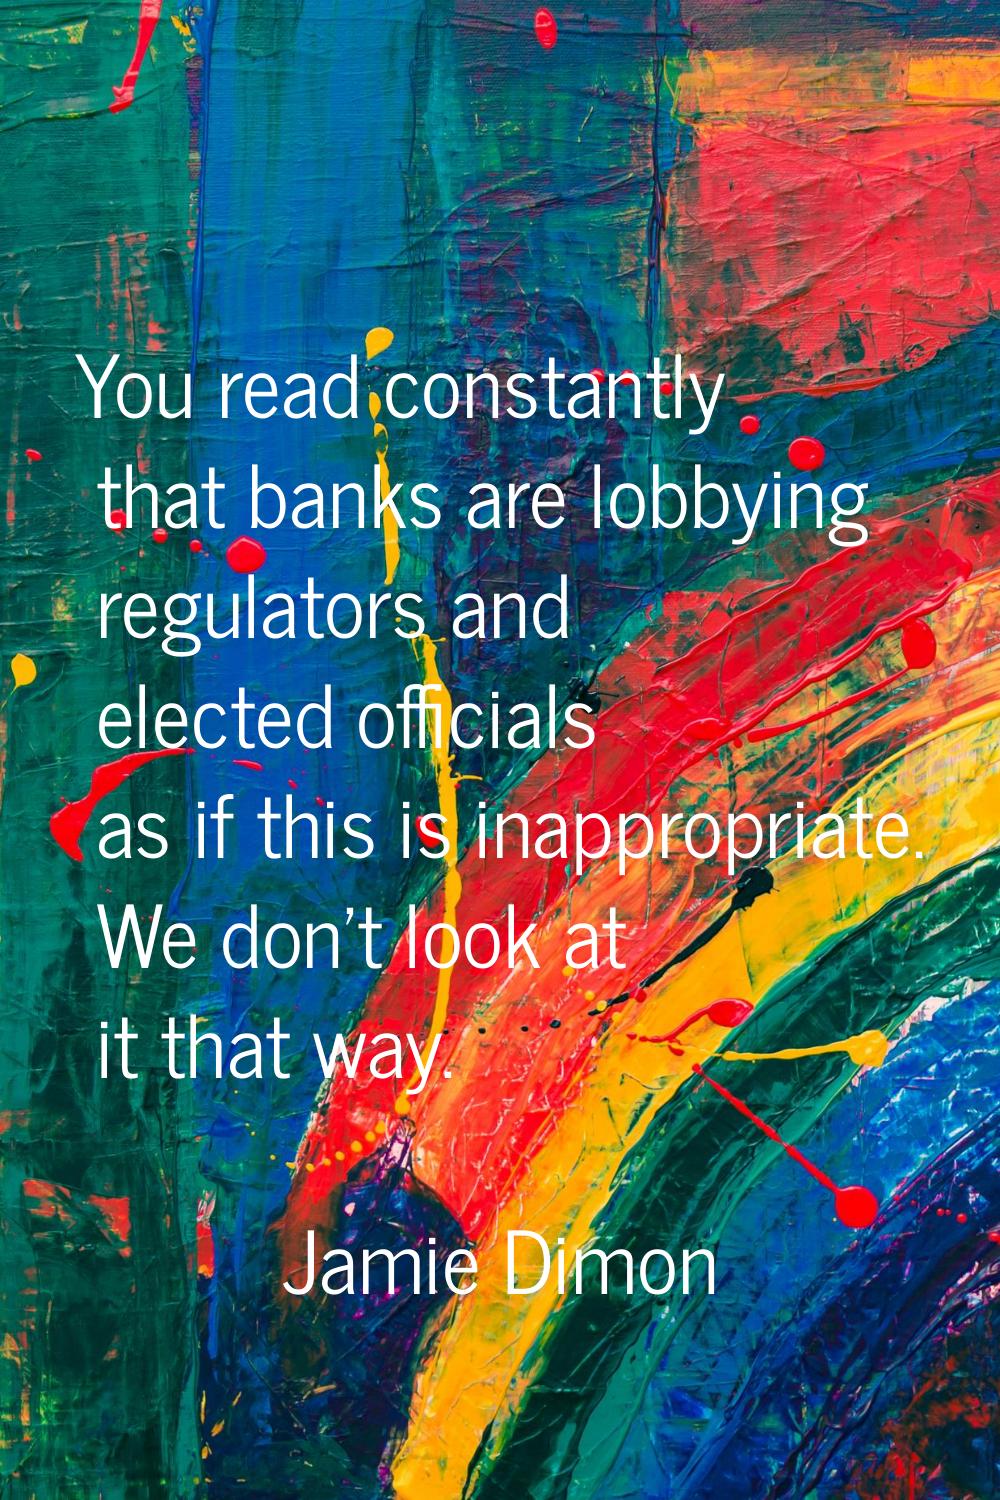 You read constantly that banks are lobbying regulators and elected officials as if this is inapprop